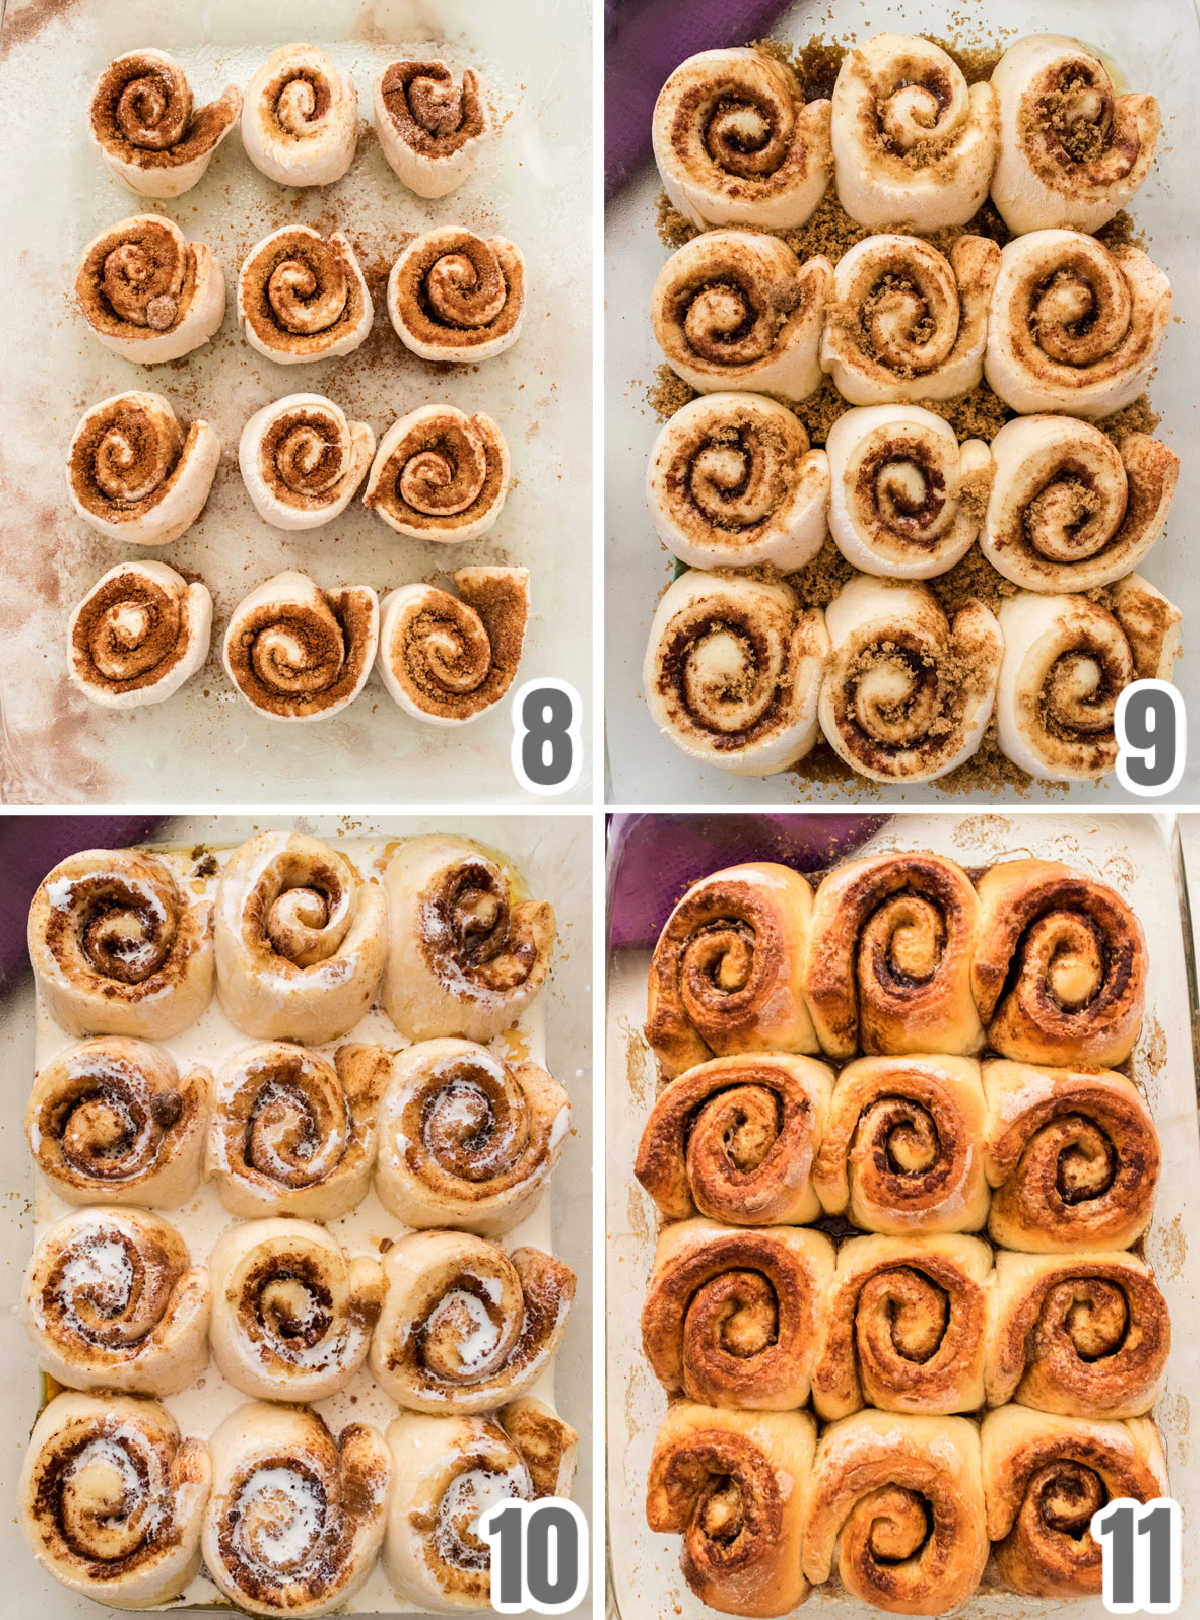 Collage image showing how to let the sticky buns rise and then bake them.